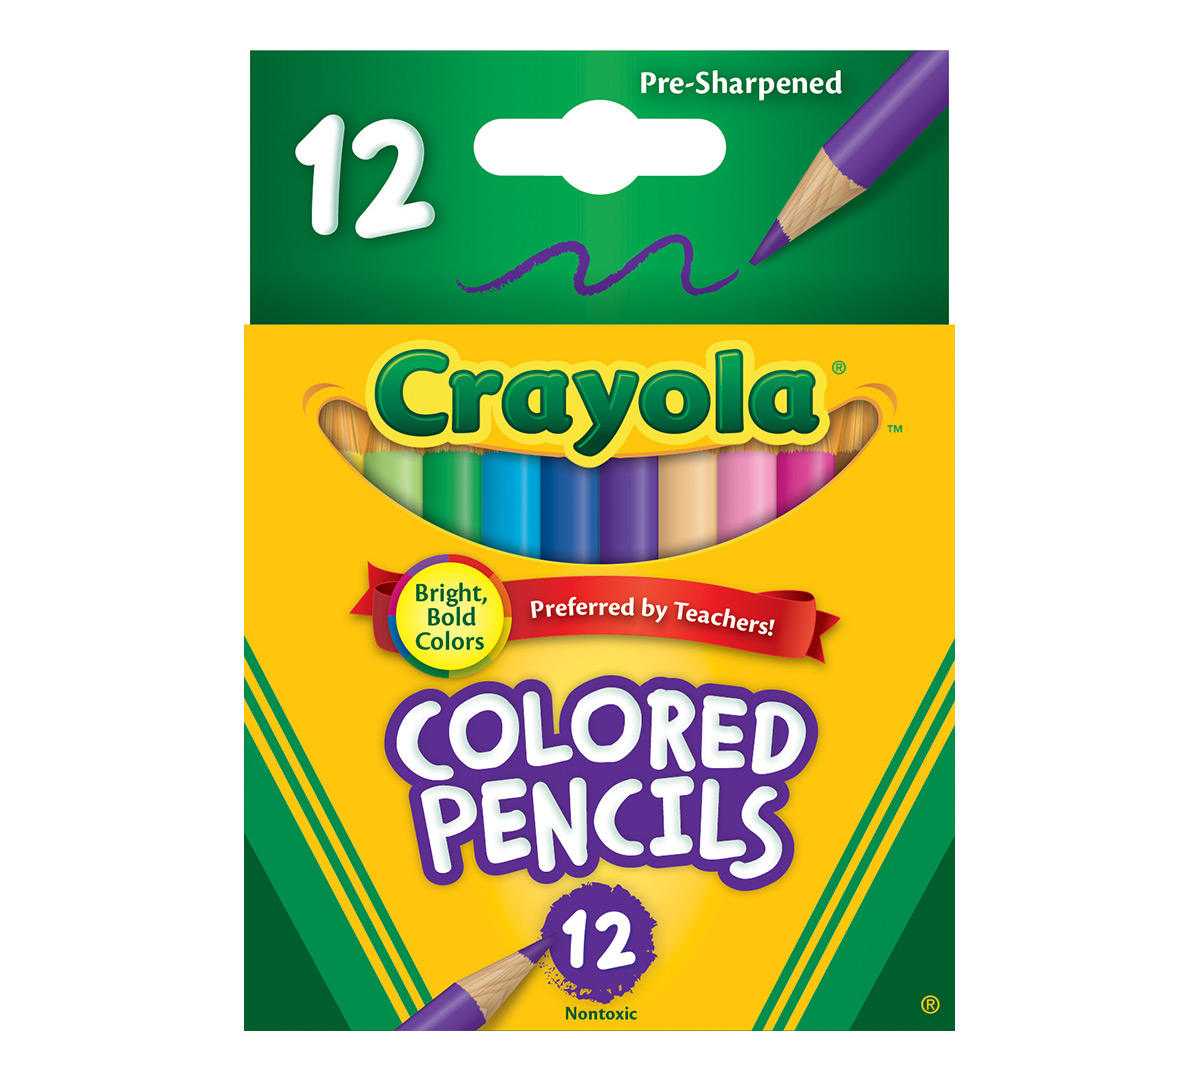 Crayola Colors of Kindness Colored Pencils, School Supplies, 12 Ct,  Beginner Child